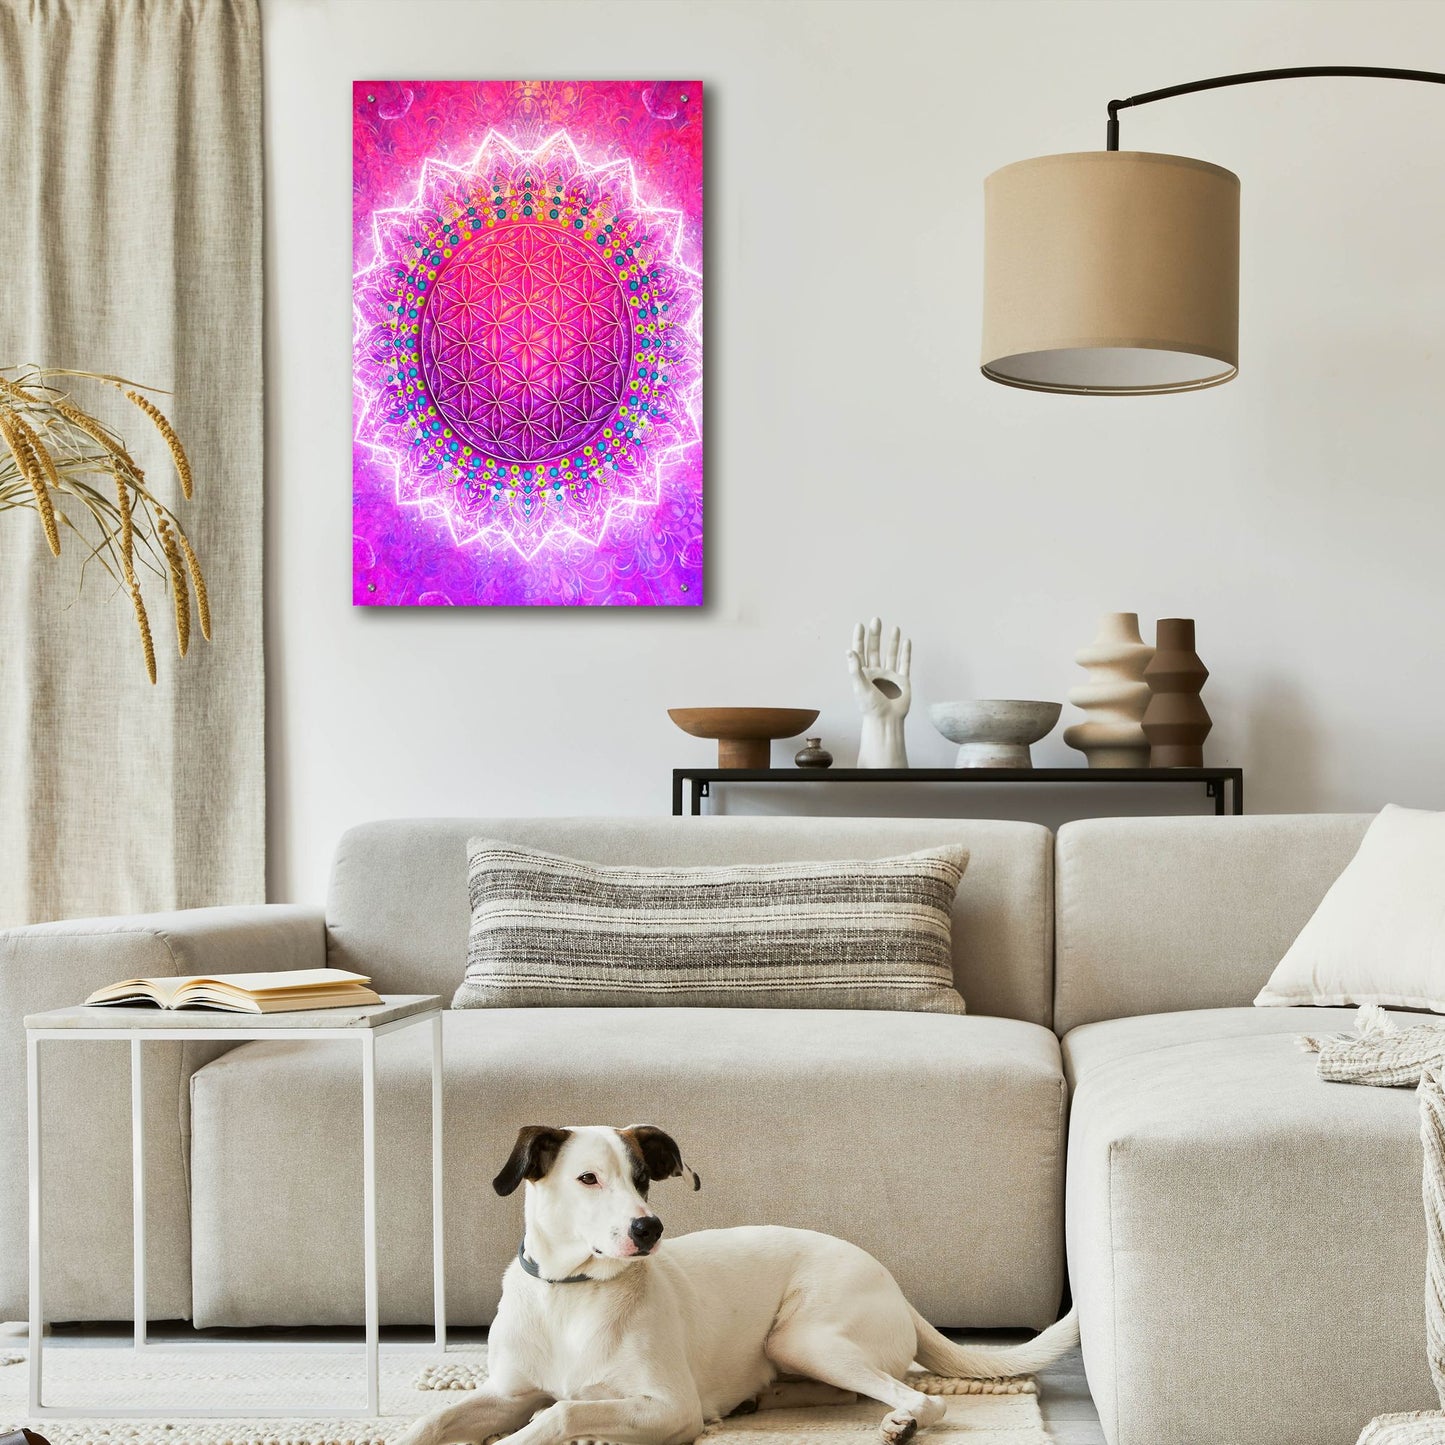 Epic Art 'Flower Of Life' by Cameron Gray, Acrylic Glass Wall Art,24x36